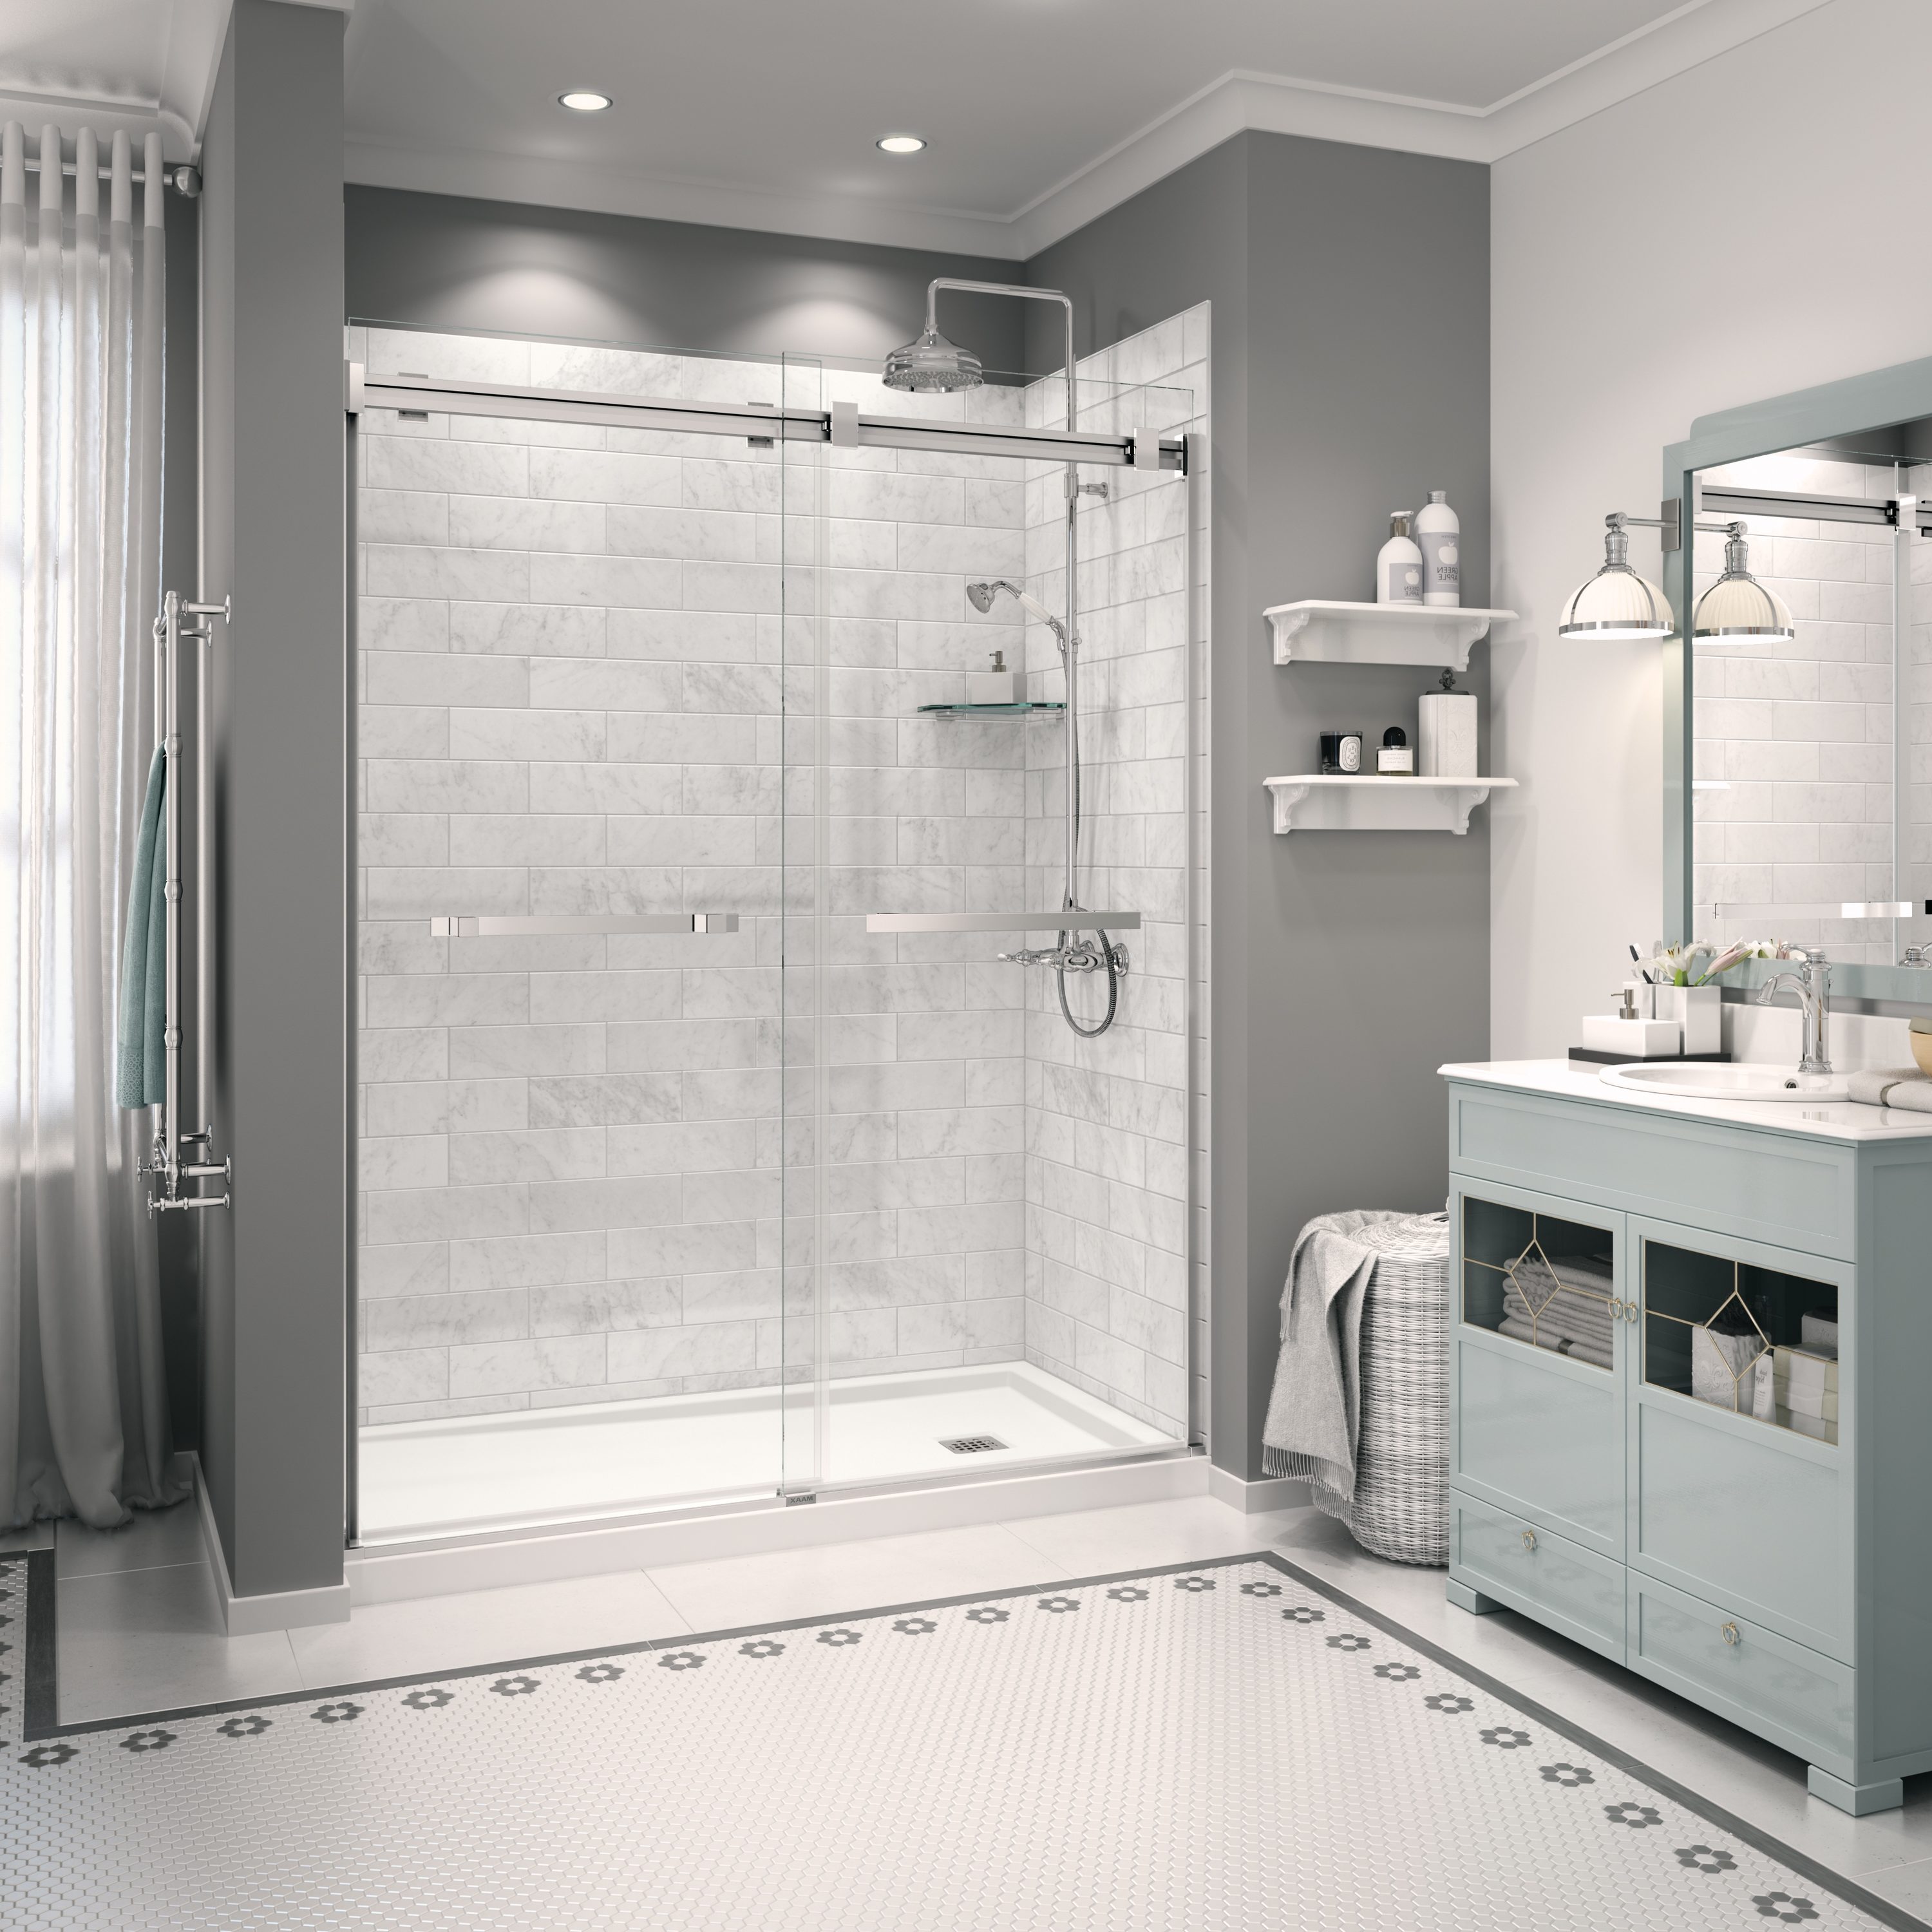 Stylish Shower Wall Tiles with Convenient Built-in Soap Dish